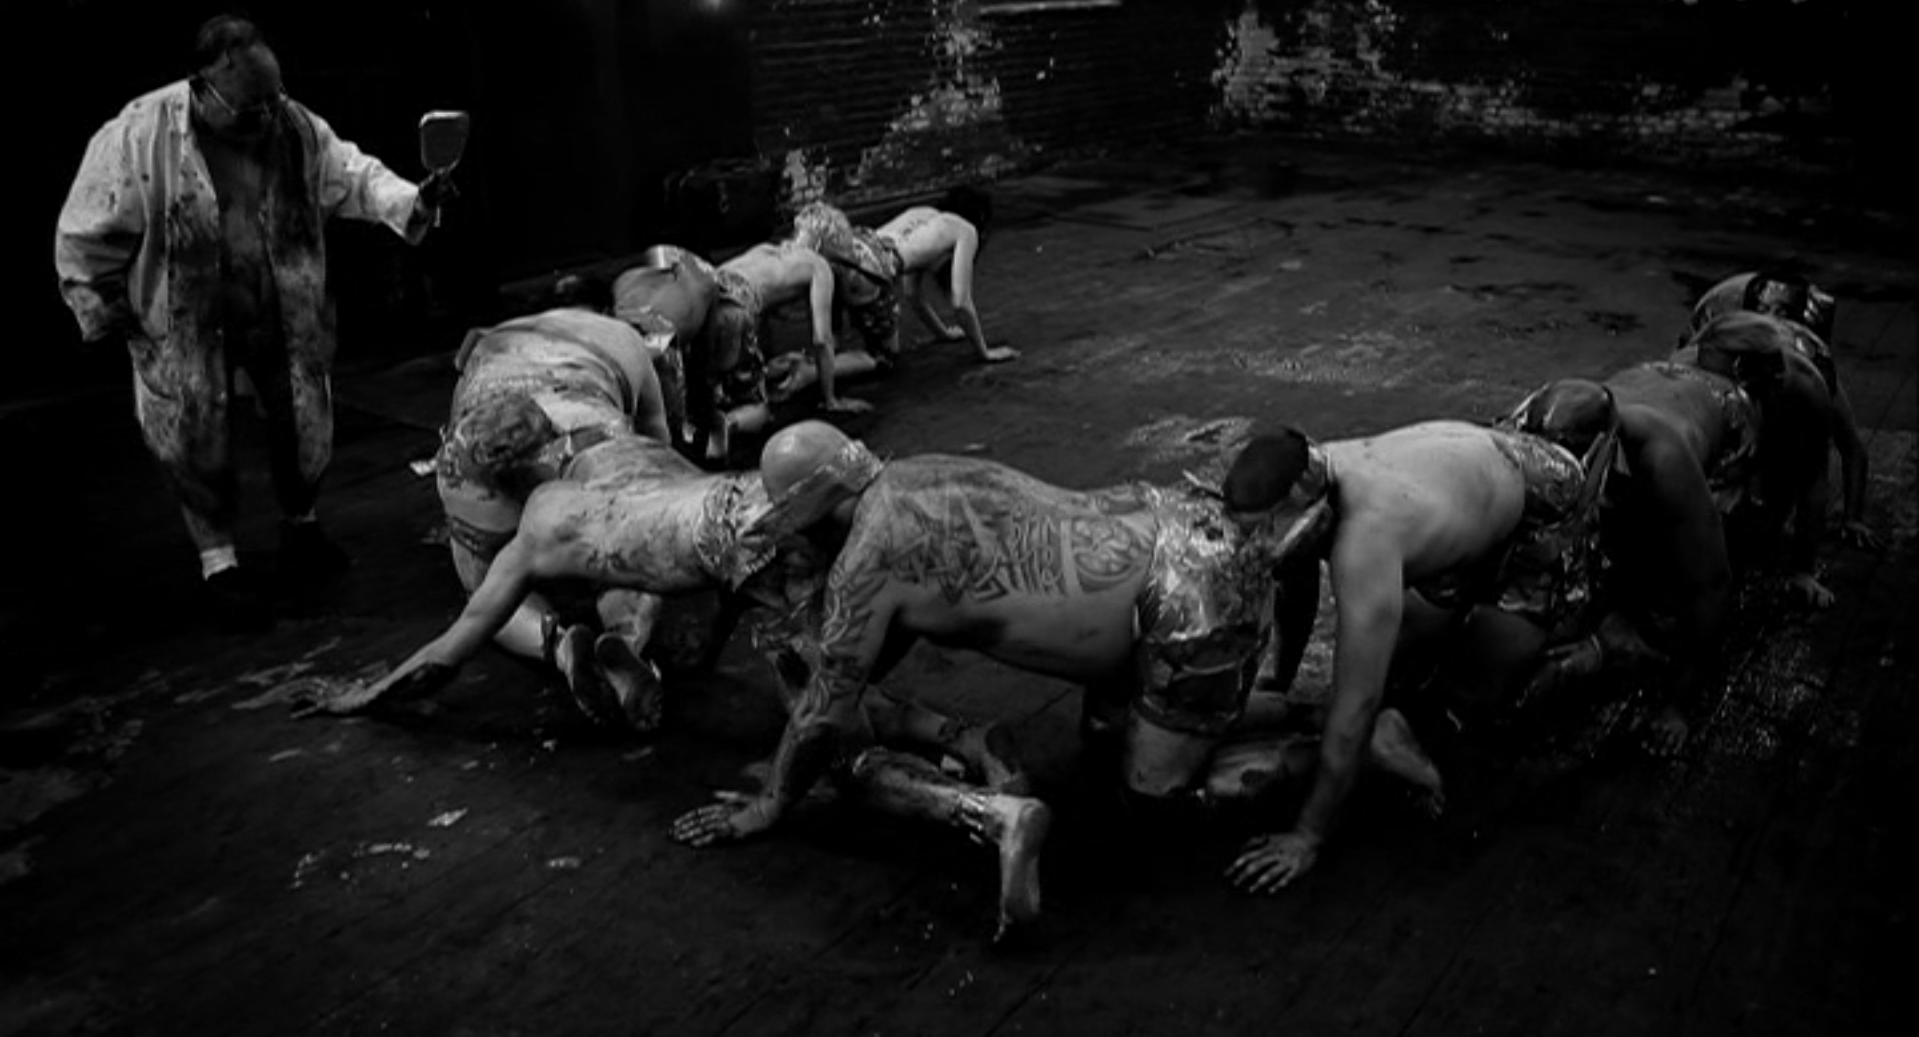 The Human Centipede II (Full Sequence) .